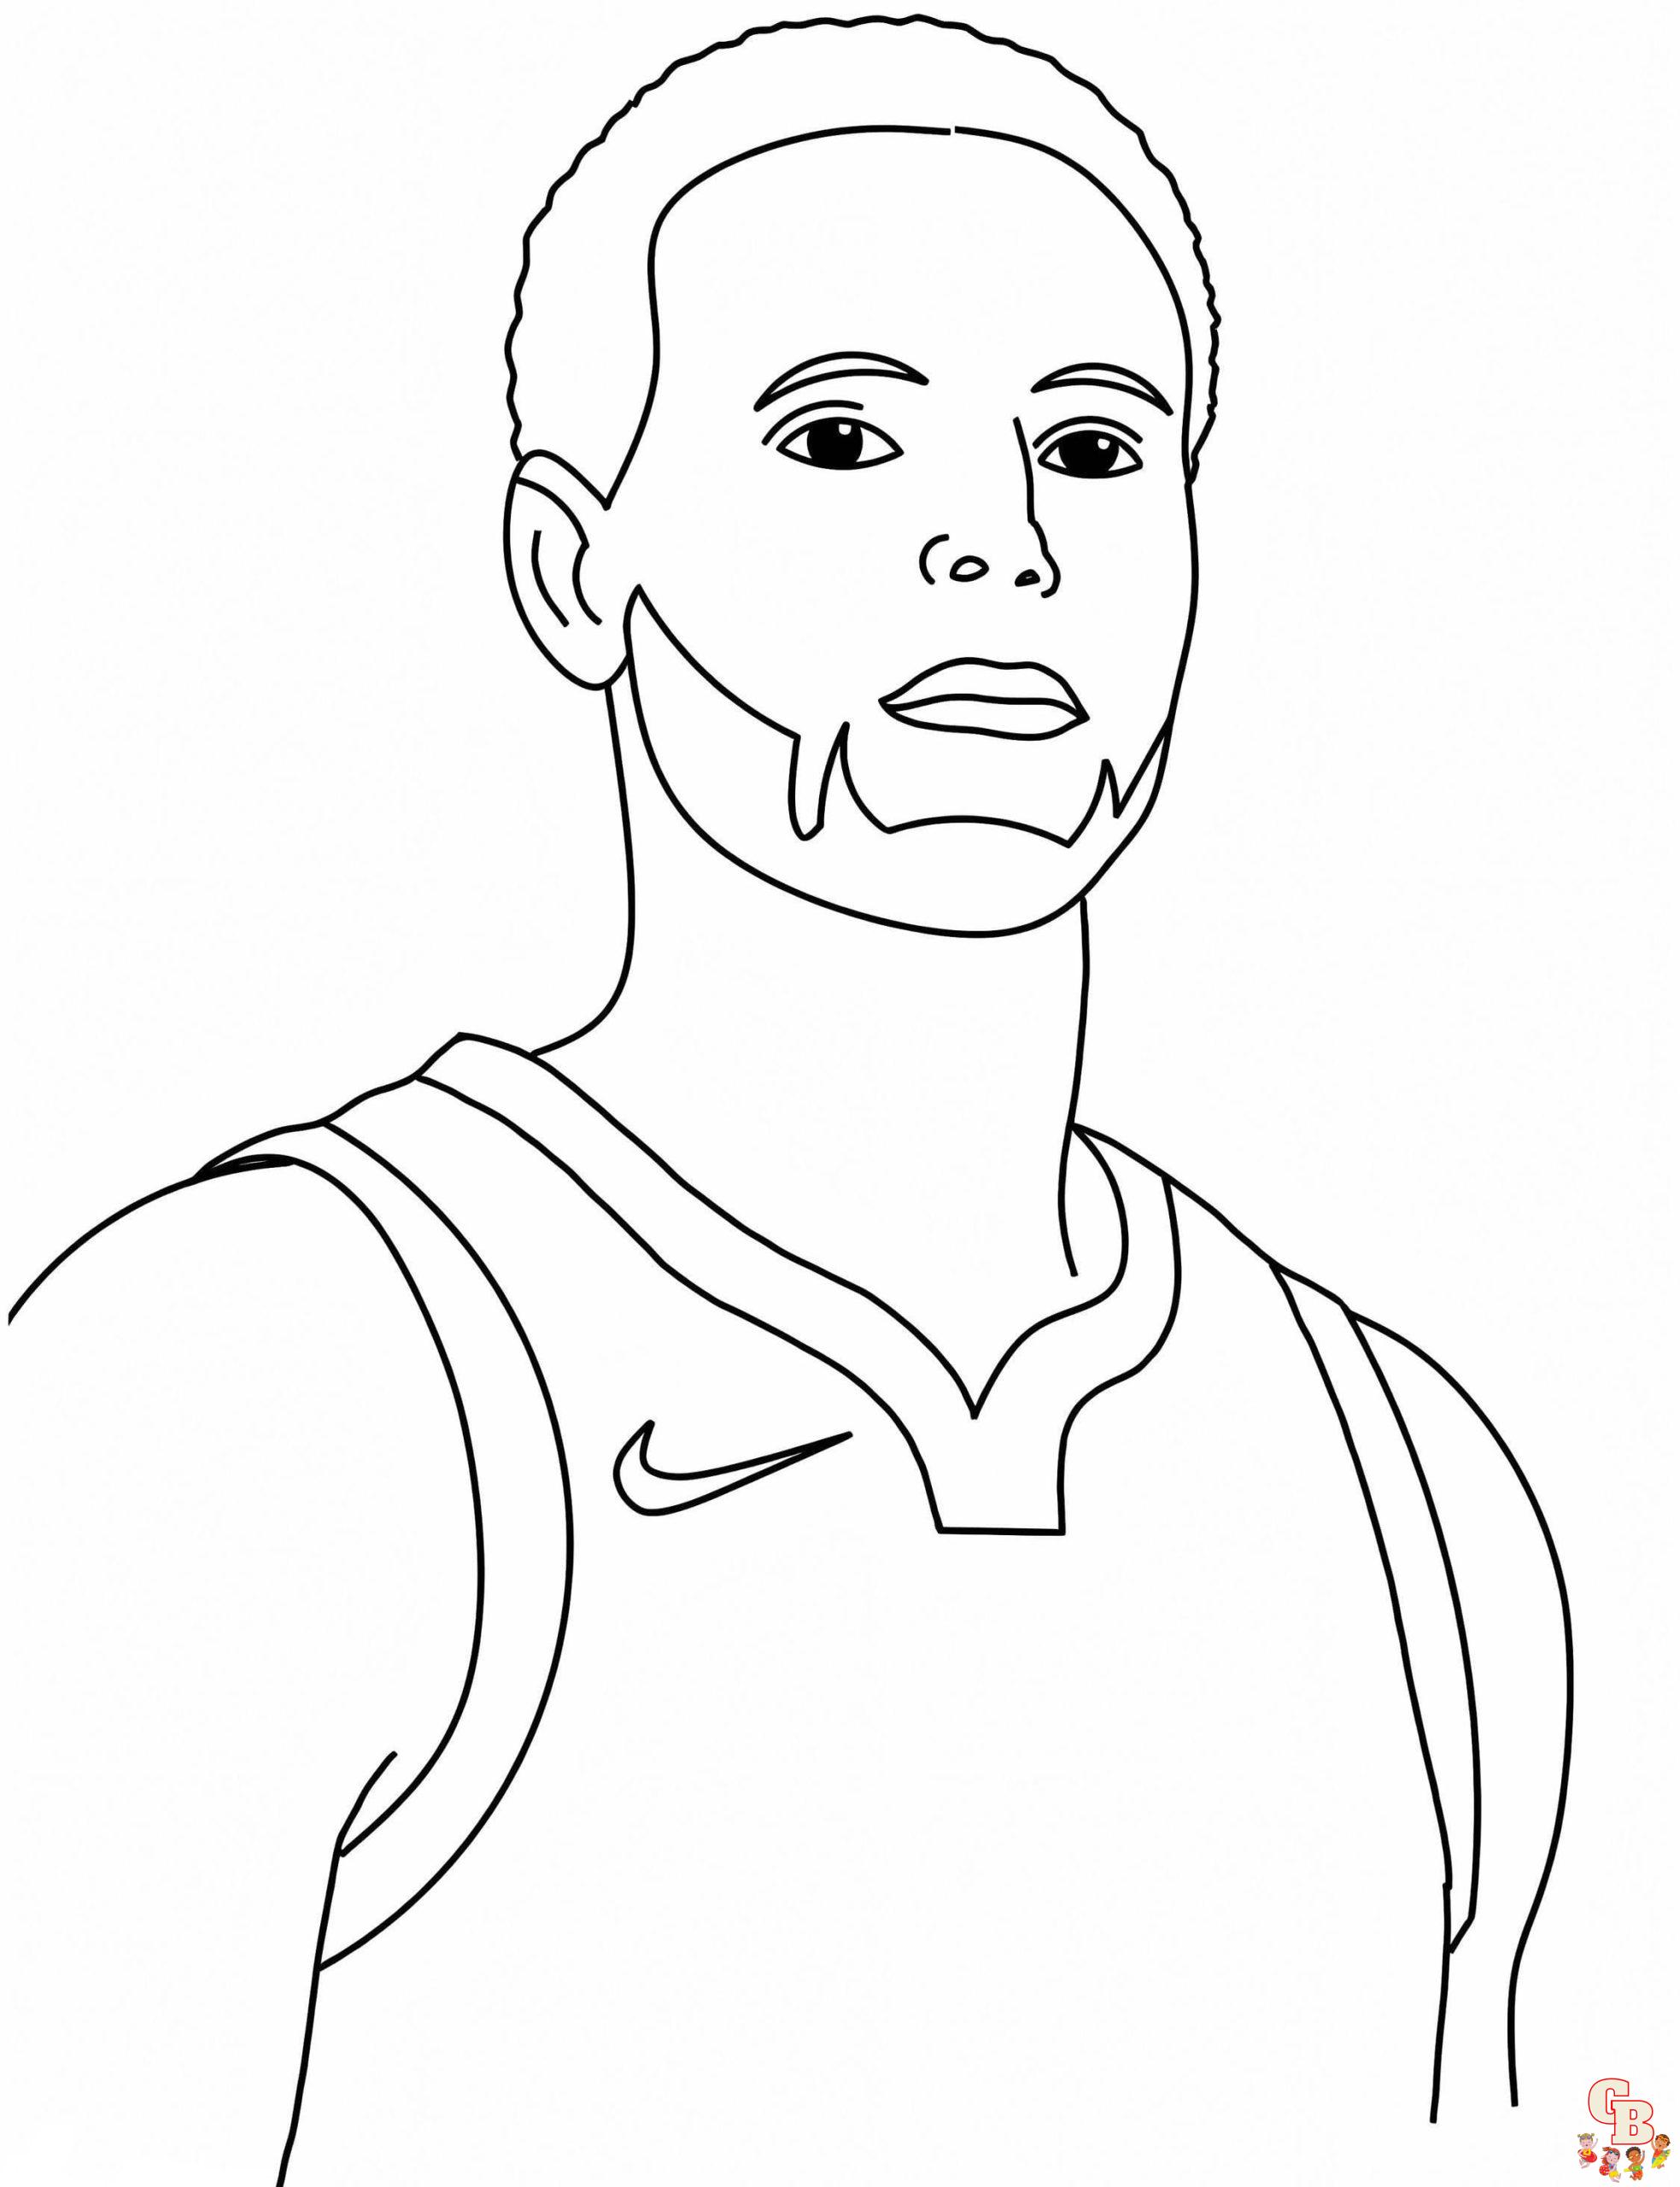 18 Steph Curry Coloring Pages (Free PDF Printables)